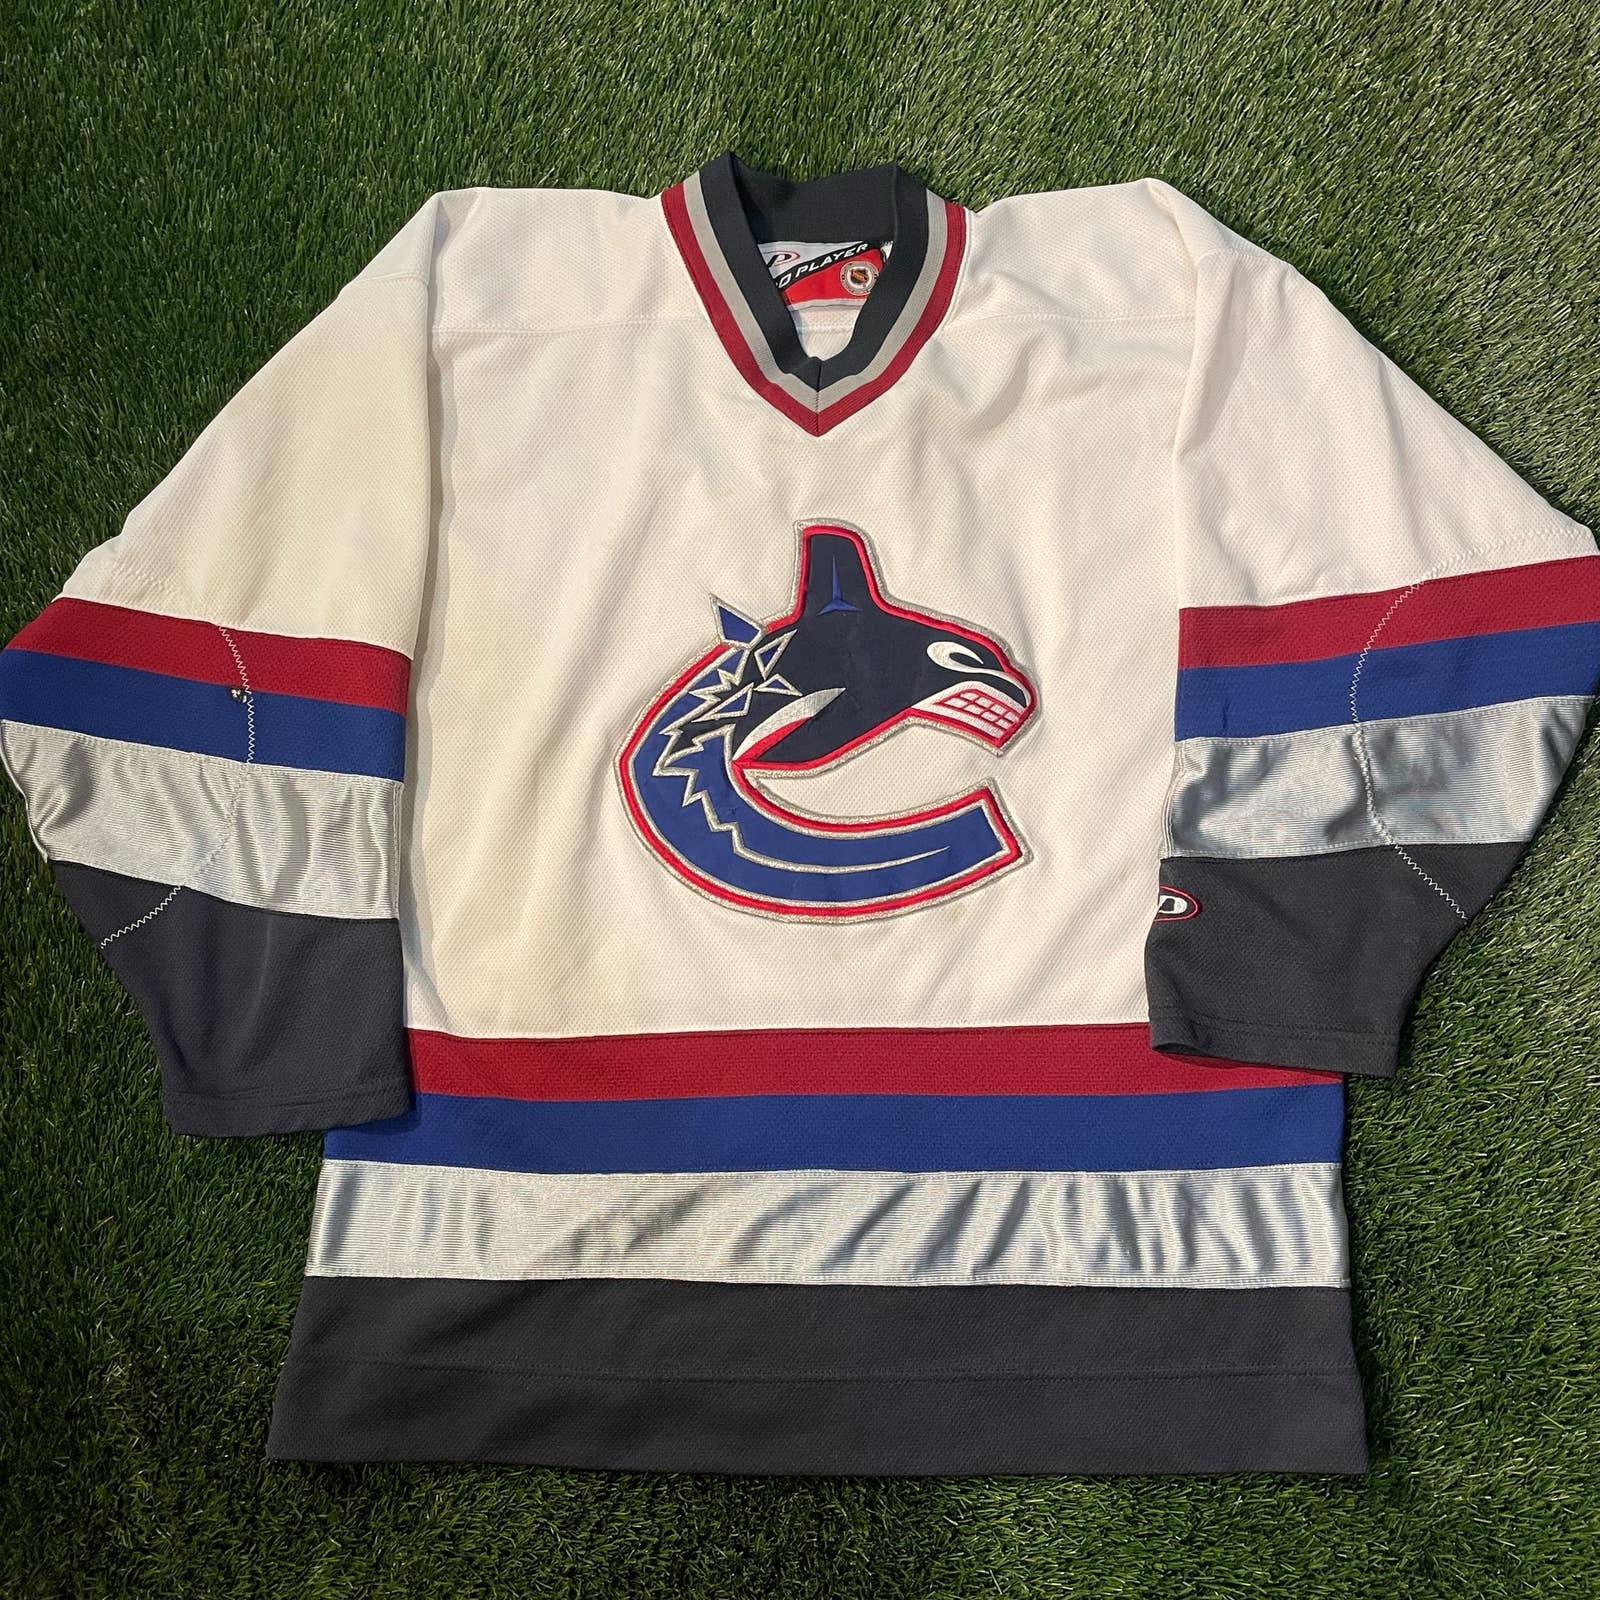 Authentic Vancouver Canucks Small CCM Jersey Alternate Gradient Orca